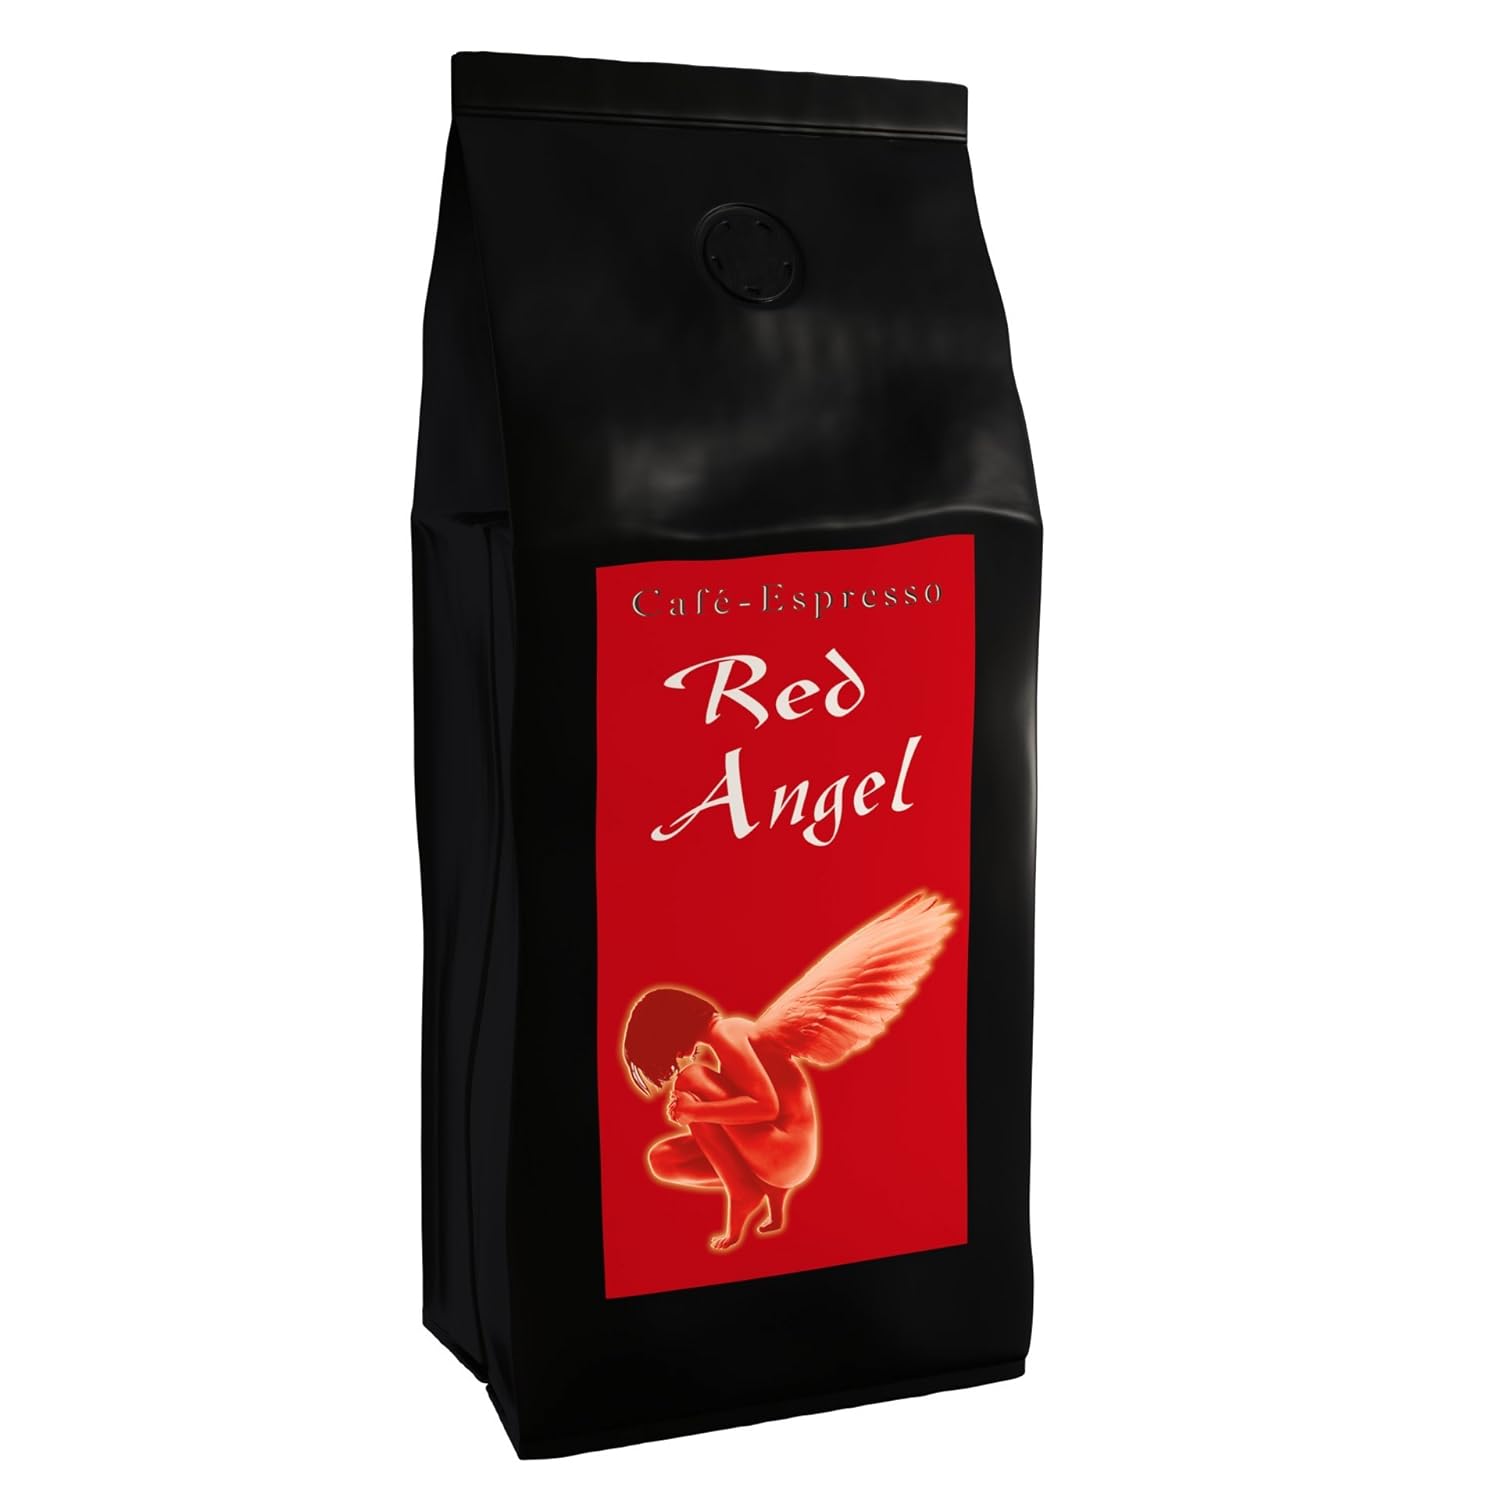 Café Espresso Coffee Red Angel - The Fiery (The Probably Strongest Coffee in the World) (Ground, 500 g) - Top Coffee - Low Acid - Gentle and Freshly Roasted